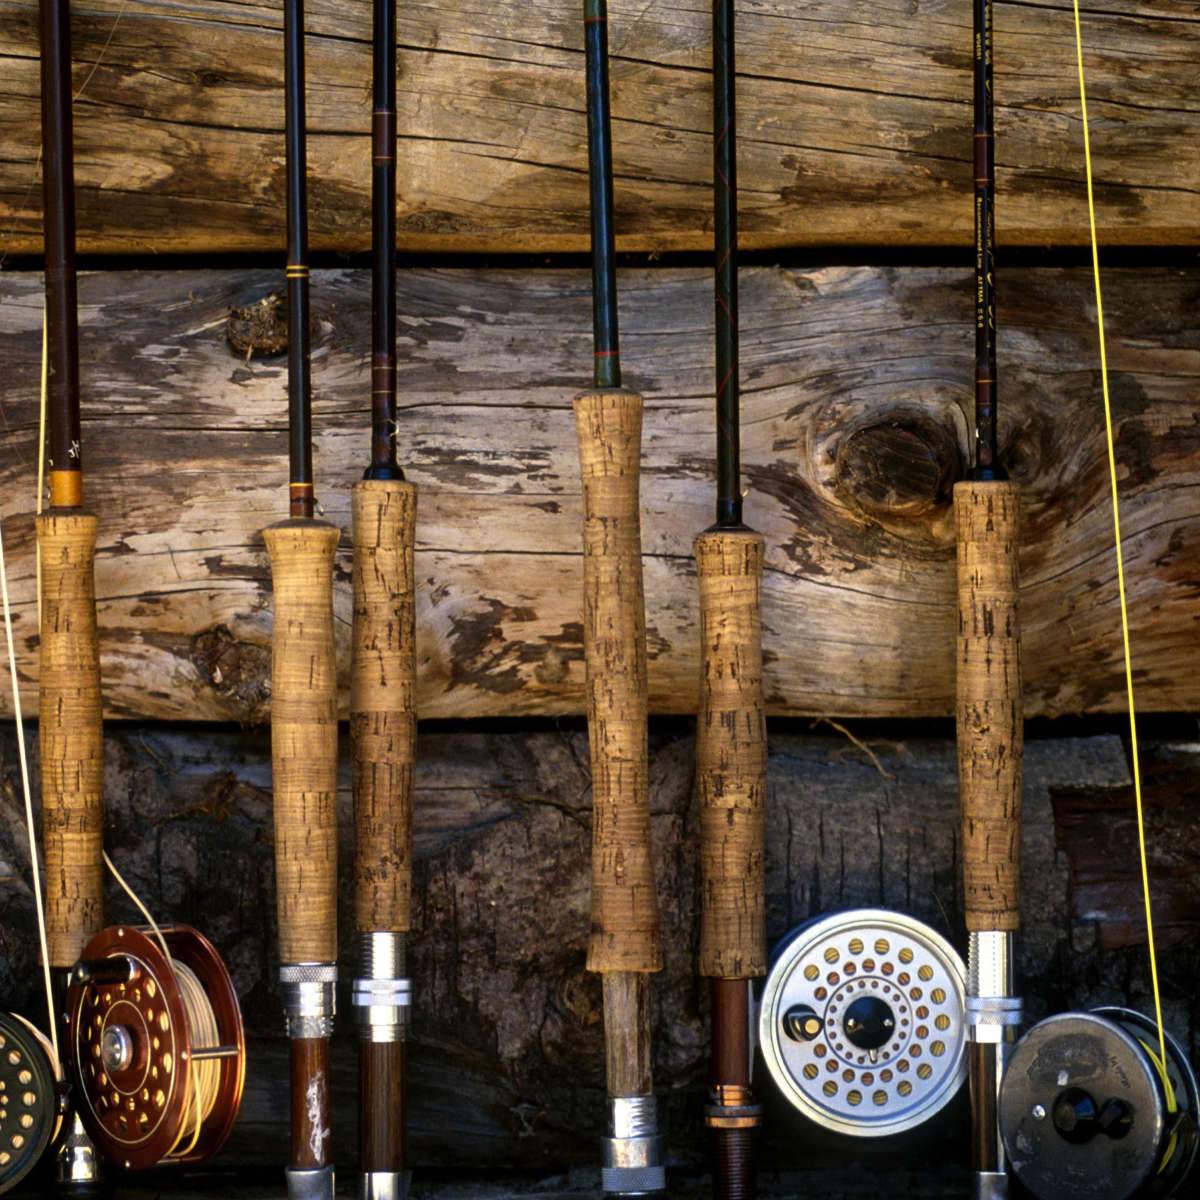 Big Game Fishing Reels & Rods' Stretched Canvas Print